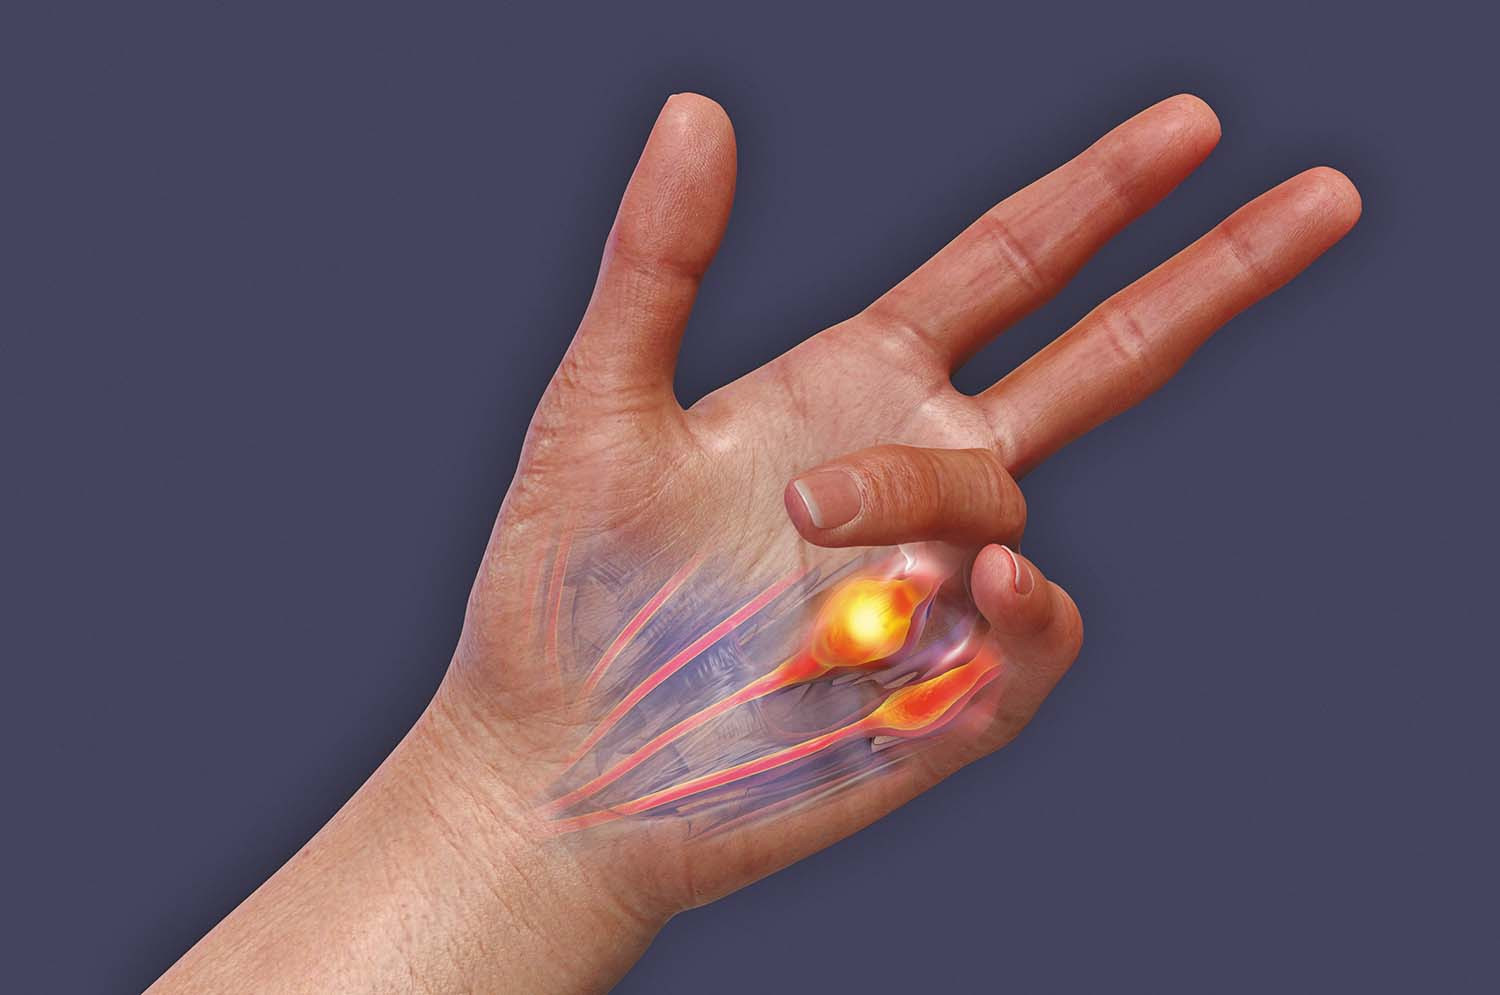 illustration showing Dupuytren's contracture pulling third and fourth fingers toward the palm of a hand; palm is translucent and shows a glowing lump that causes the pull